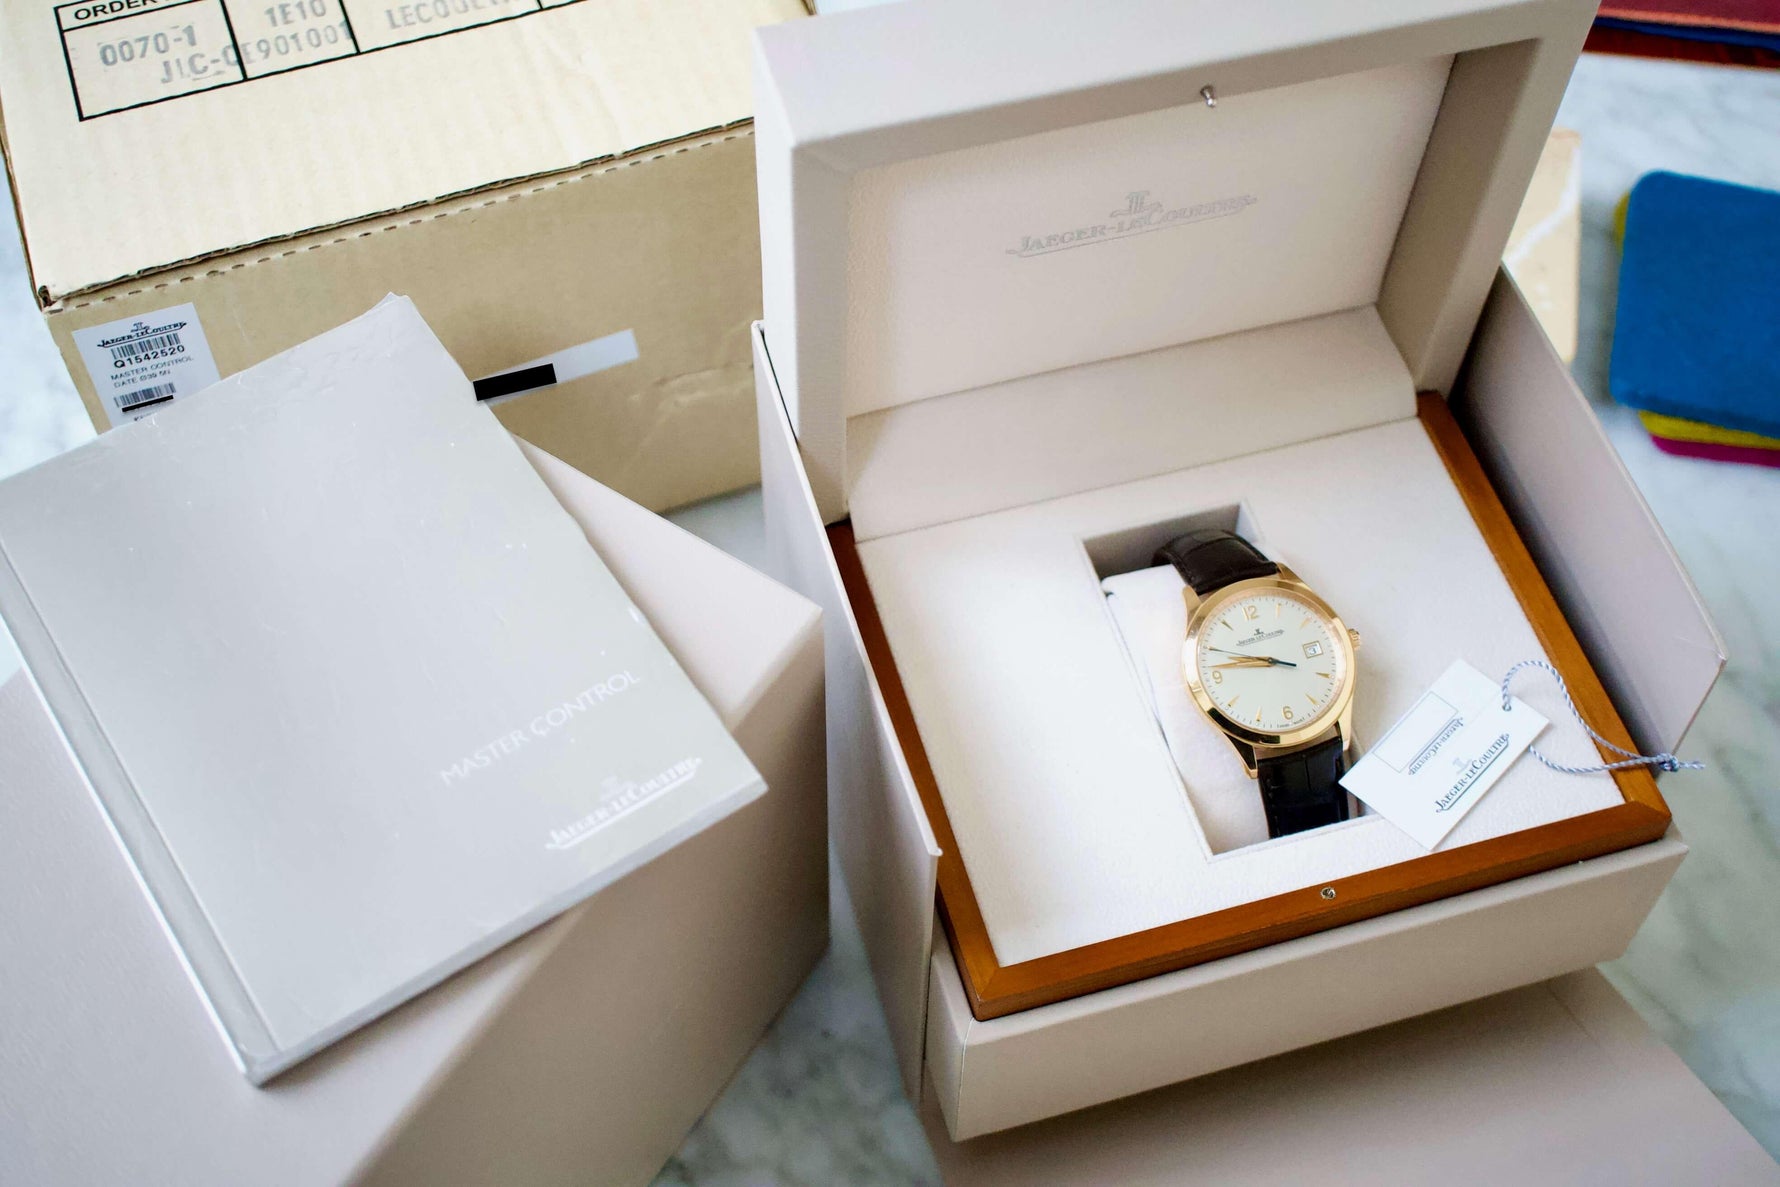 SOLD OUT: Jaeger-LeCoultre Master Control Date 39mm 18K Rose Gold 176.2.40.S Box Q1542520 - WearingTime Luxury Watches